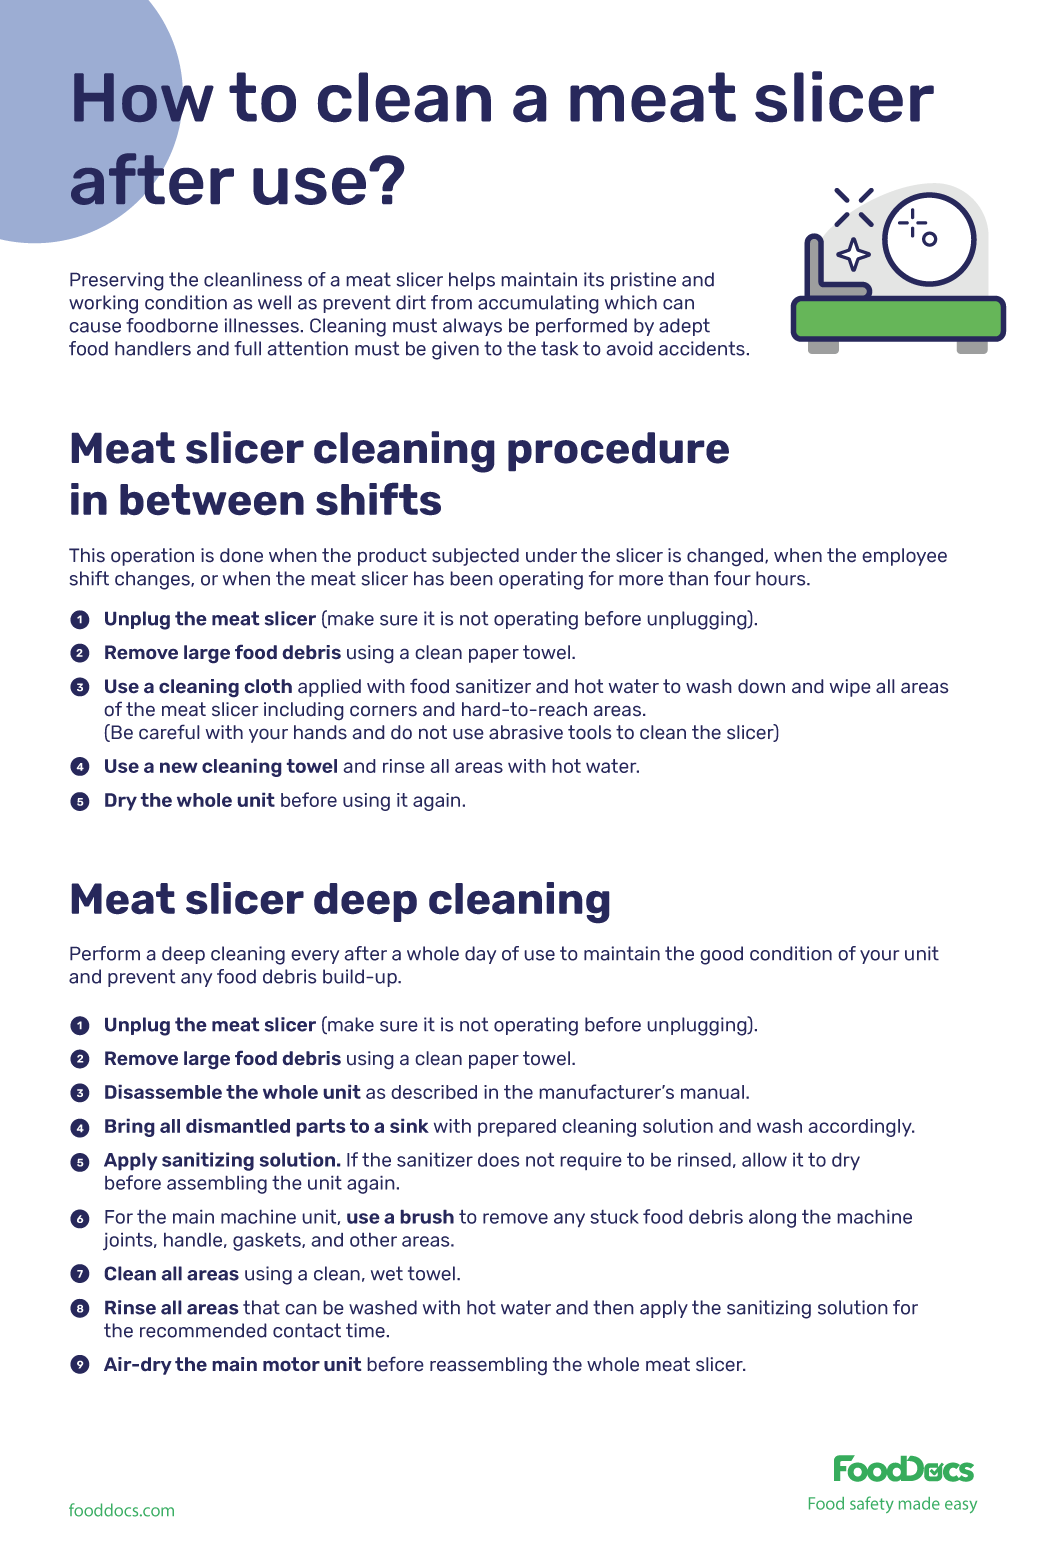 What should I know before I start to develop my own slicer